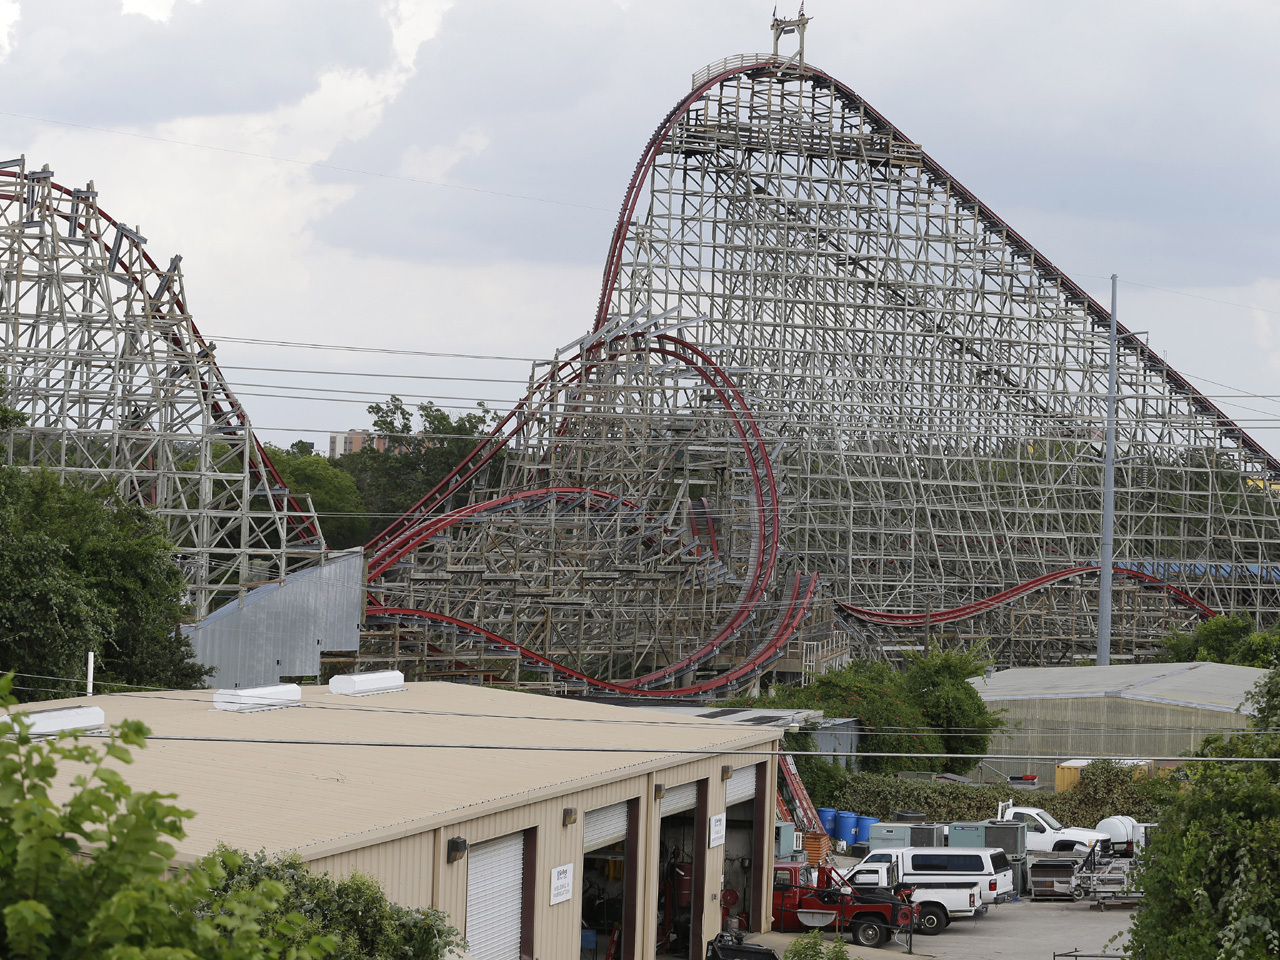 Texas Giant roller coaster has history of injuries CBS News